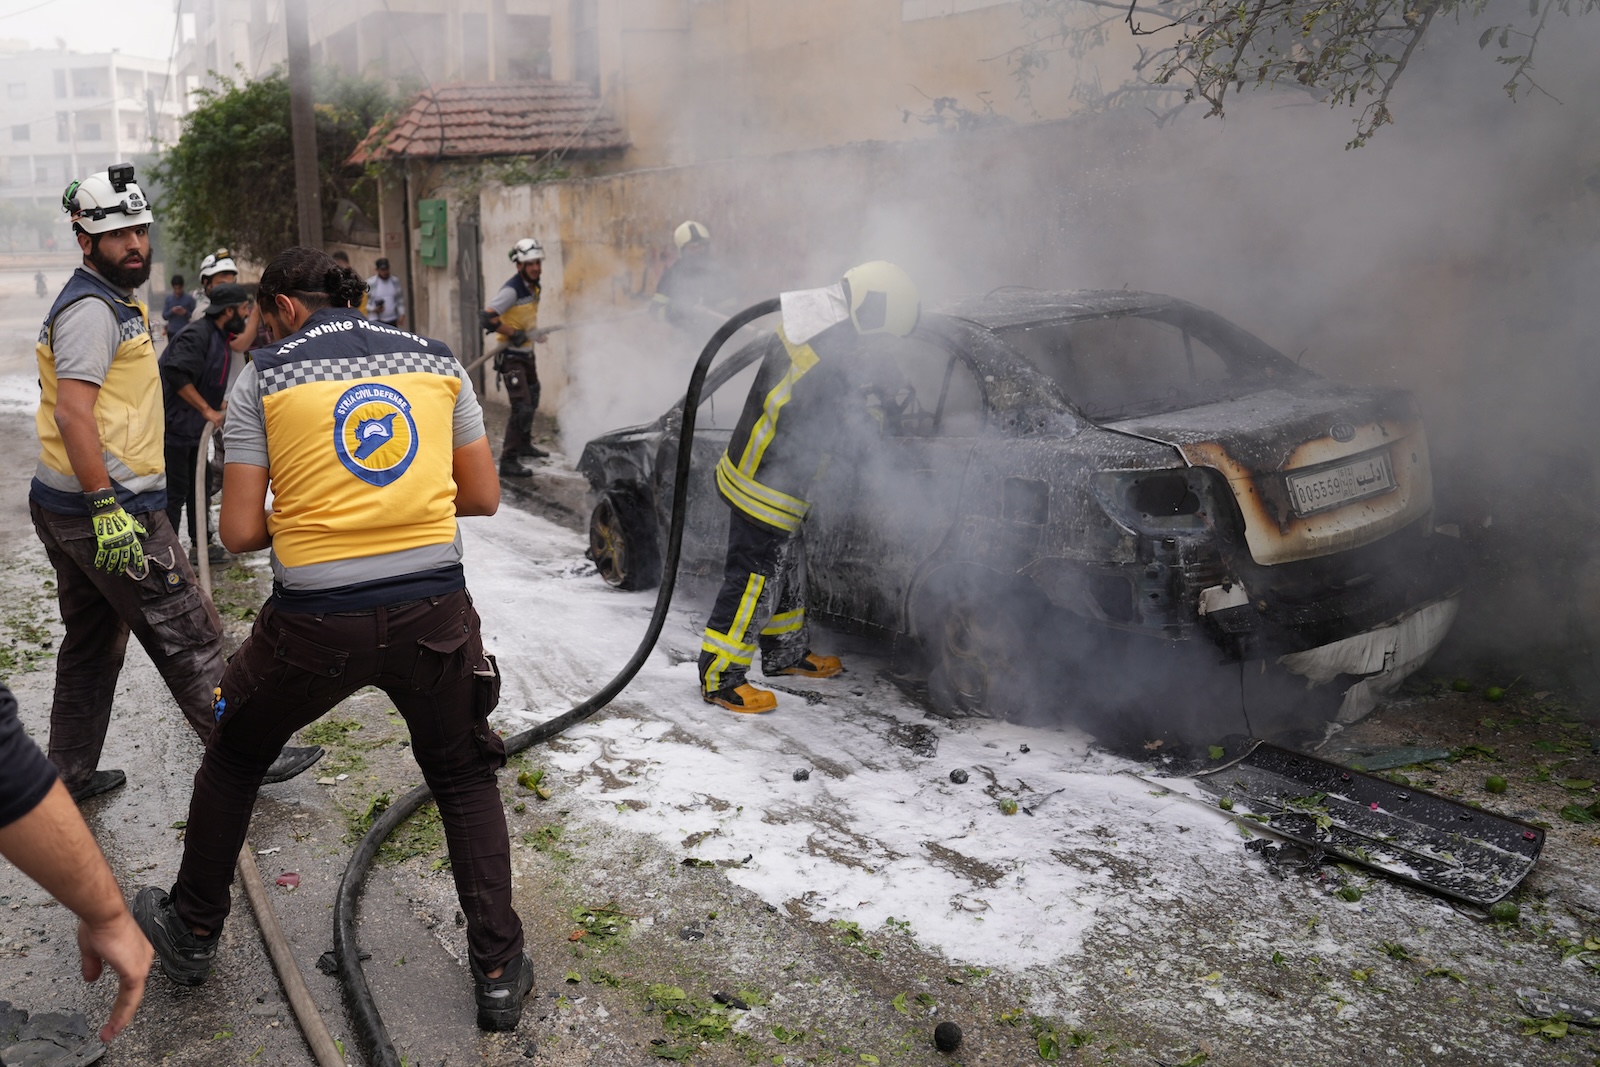 epa10907258 Members of the Syrian civil defense work at the site of an attack by Syrian forces against a neighborhood in Idlib, Syria, 08 October 2023. According to the UK-based Syrian Observatory for Human Rights (SOHR), at least four people were killed in a rocket strike reportedly carried by government forces on residential neighborhoods in the center of Idlib city. According to the White Helmets, the Syria Civil Defence organization operating in northwestern Syria, the death toll of attacks targeting opposition-controlled Aleppo countryside and Idlib since 05 October increased to at least 41 people.  EPA/YAHYA NEMAH